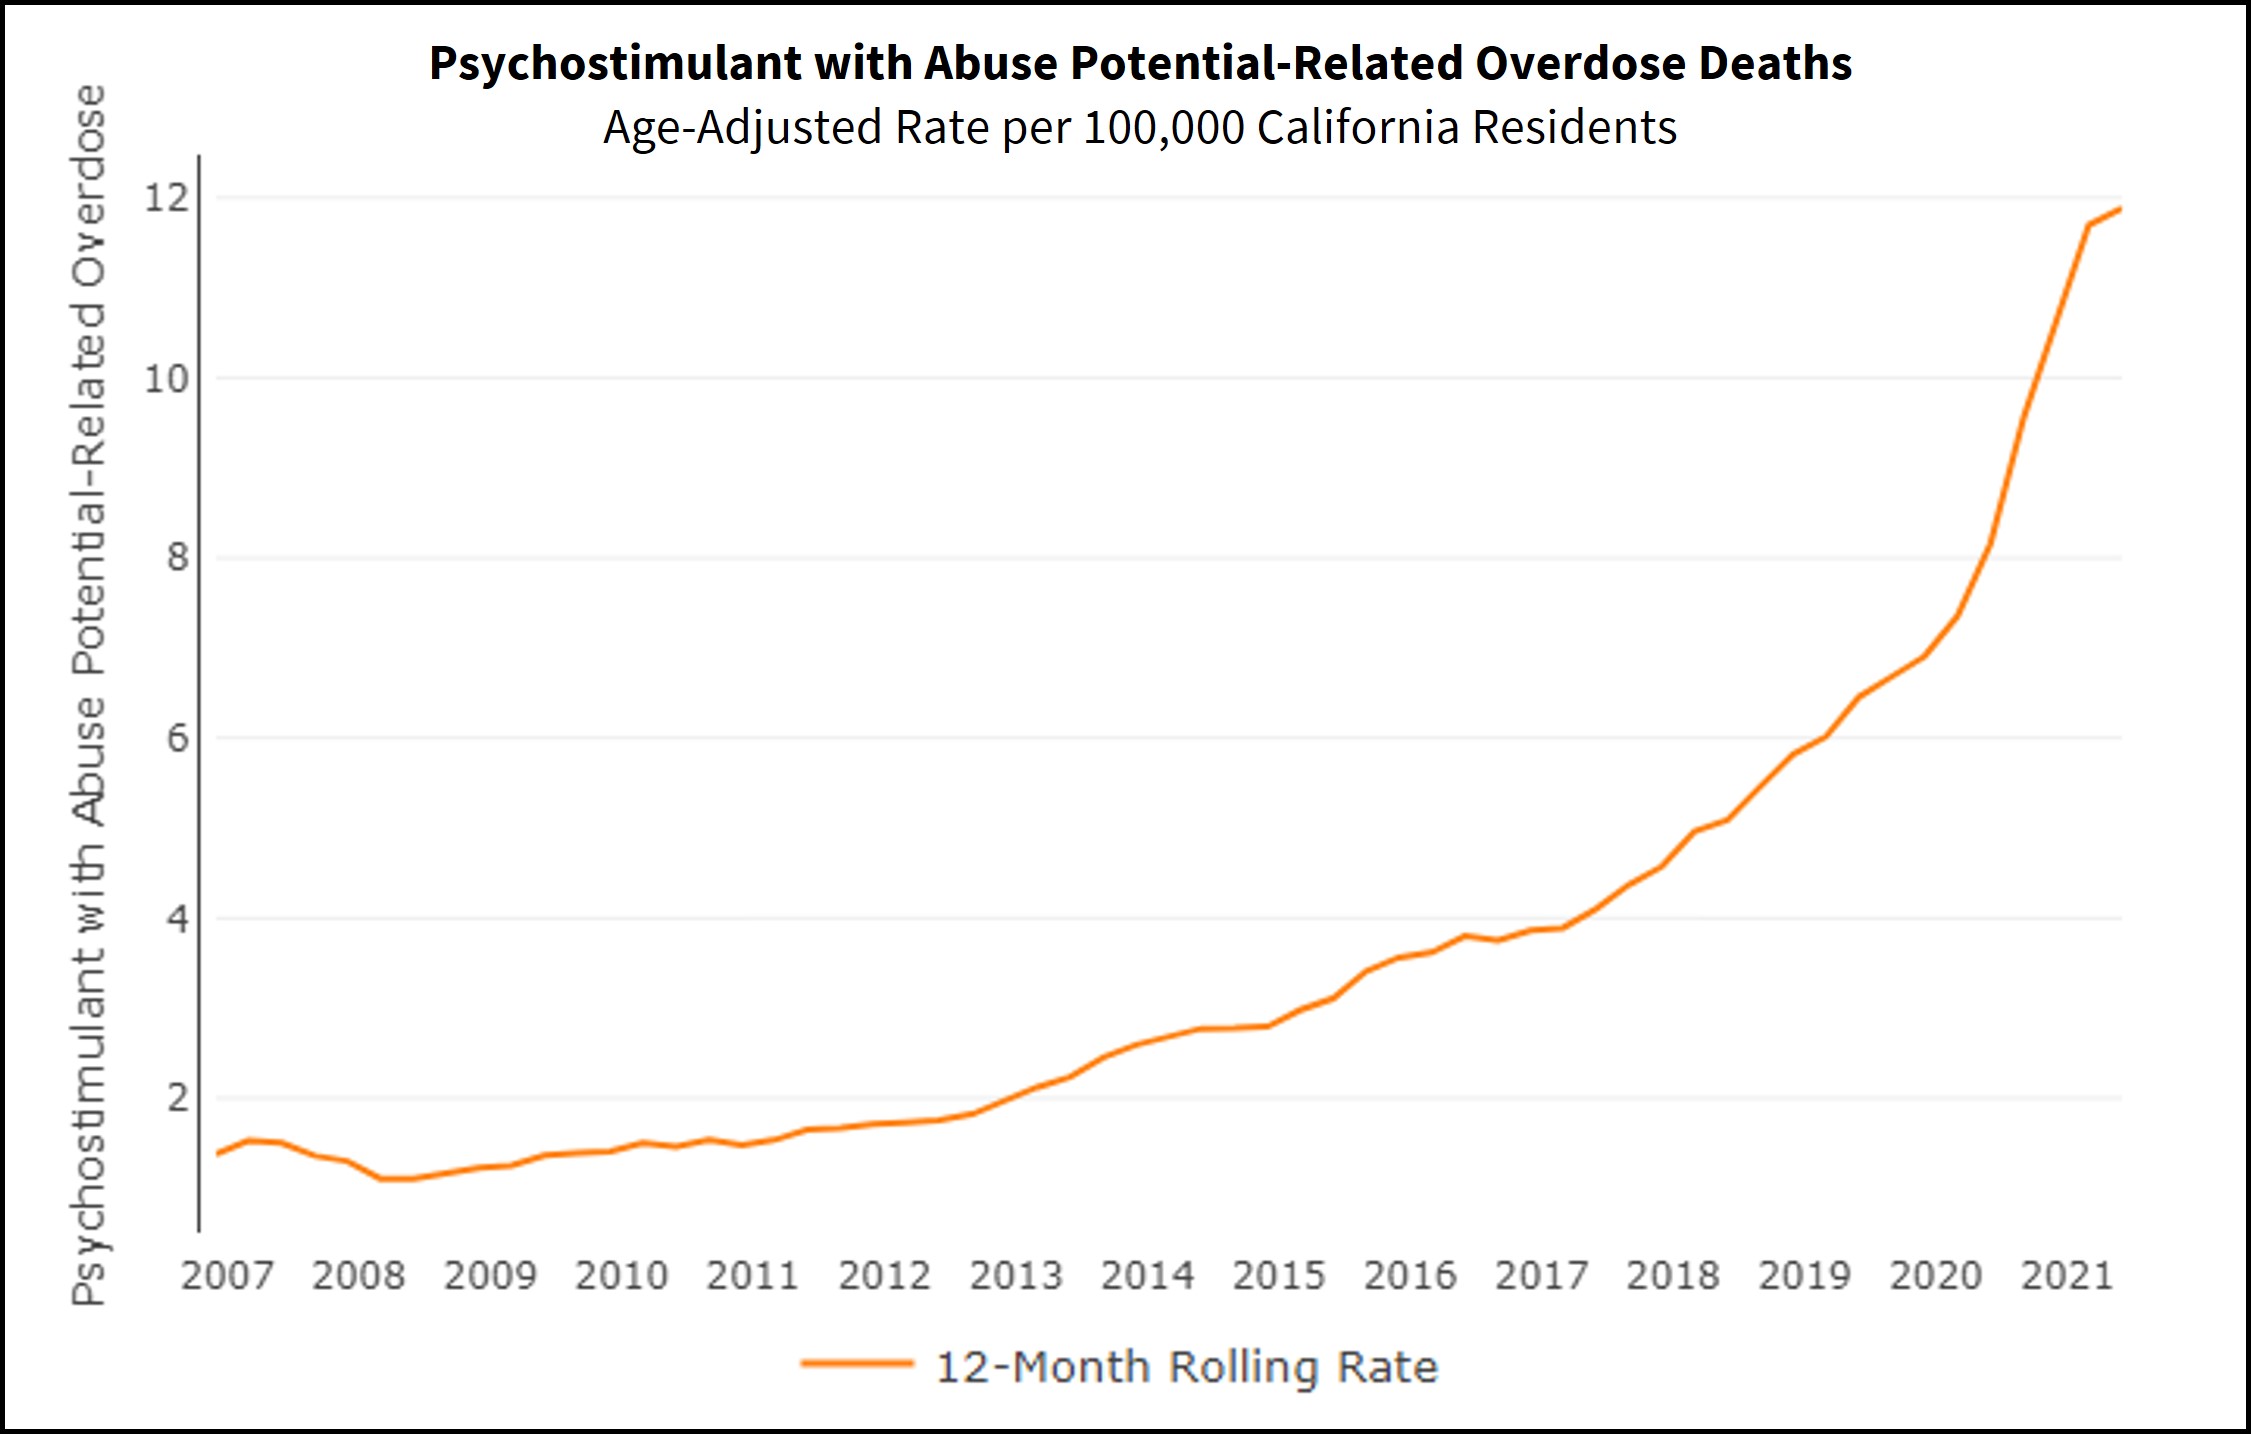 Psychostimulant Graph. The years of the line graph are from 2007 to 2021. The trend of the line graph is increasing over time. 